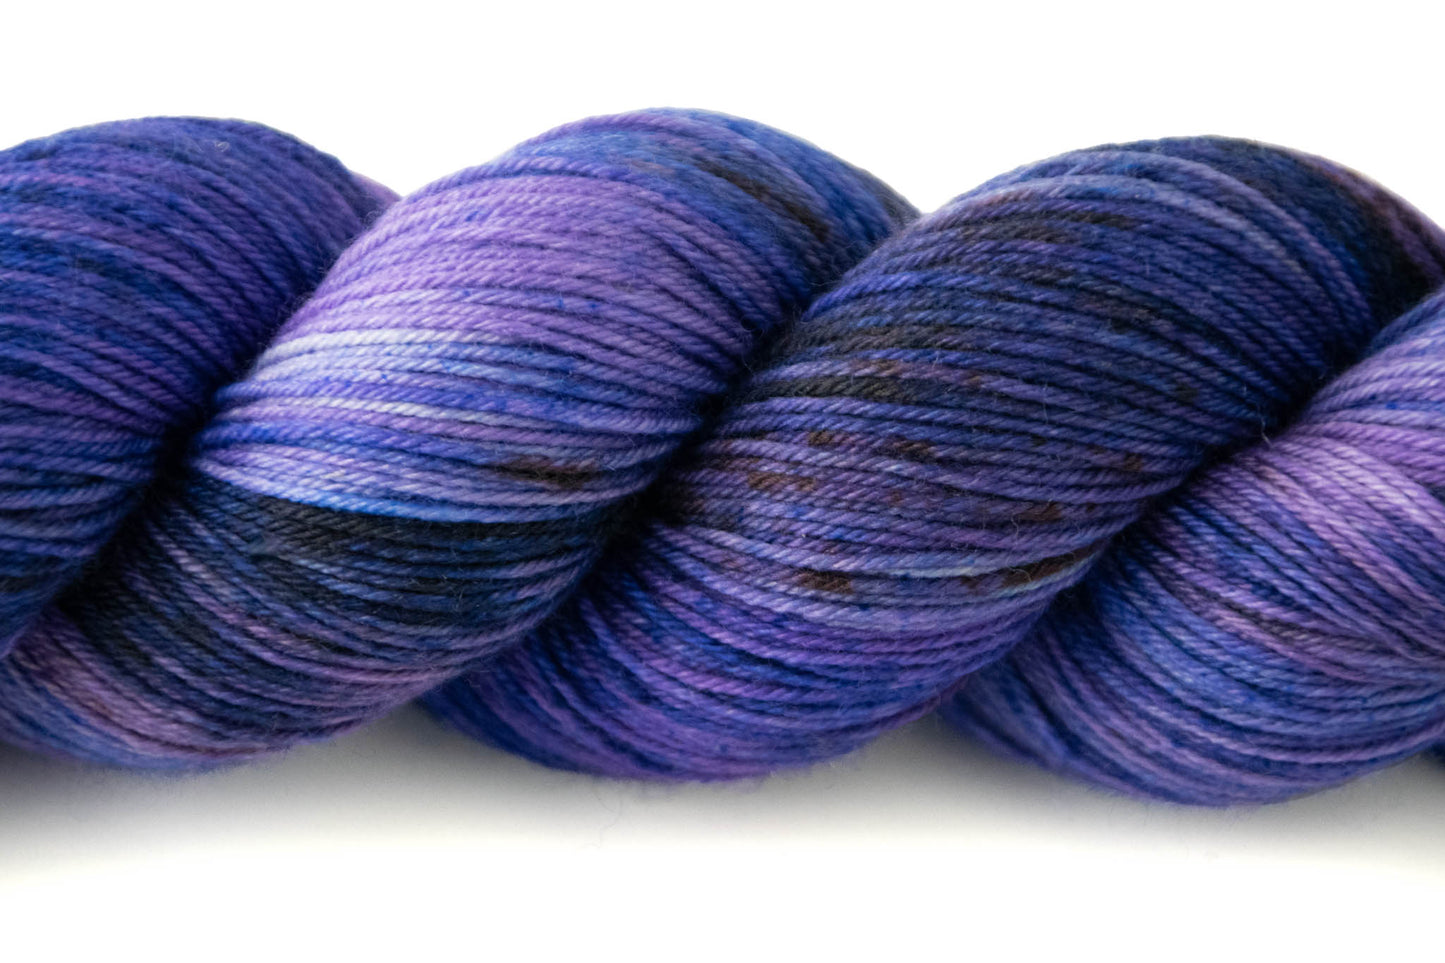 Close view of the many shades of purple and blue, as well as small speckles of brown and tiny patches of white.